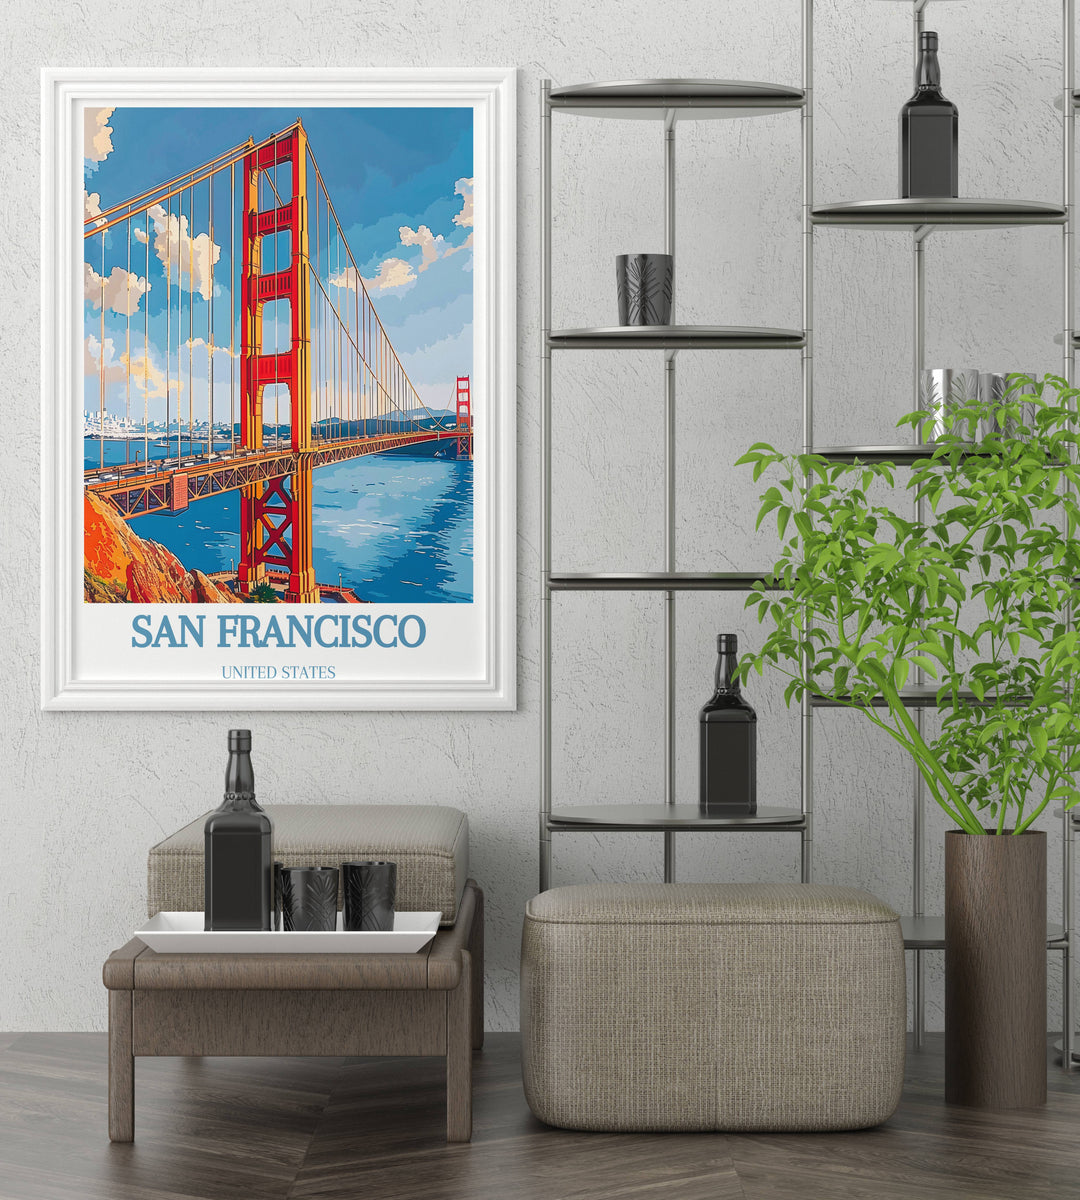 Beautiful Golden Gate Bridge Posters highlighting the scenic beauty and architectural grandeur of this iconic San Francisco landmark.